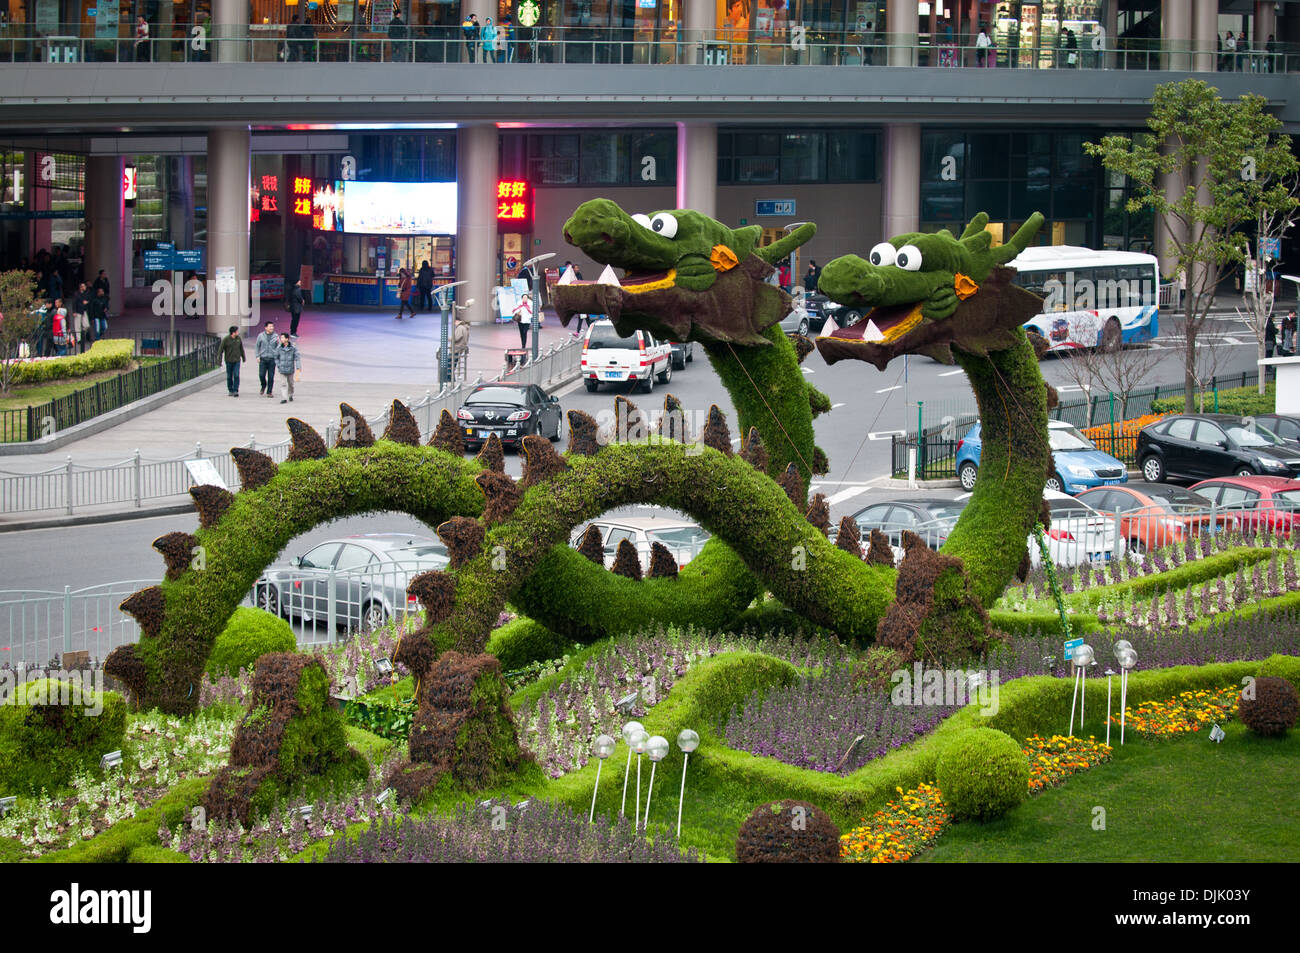 hedgerow dragons in Pudong District, Shanghai, China Stock Photo